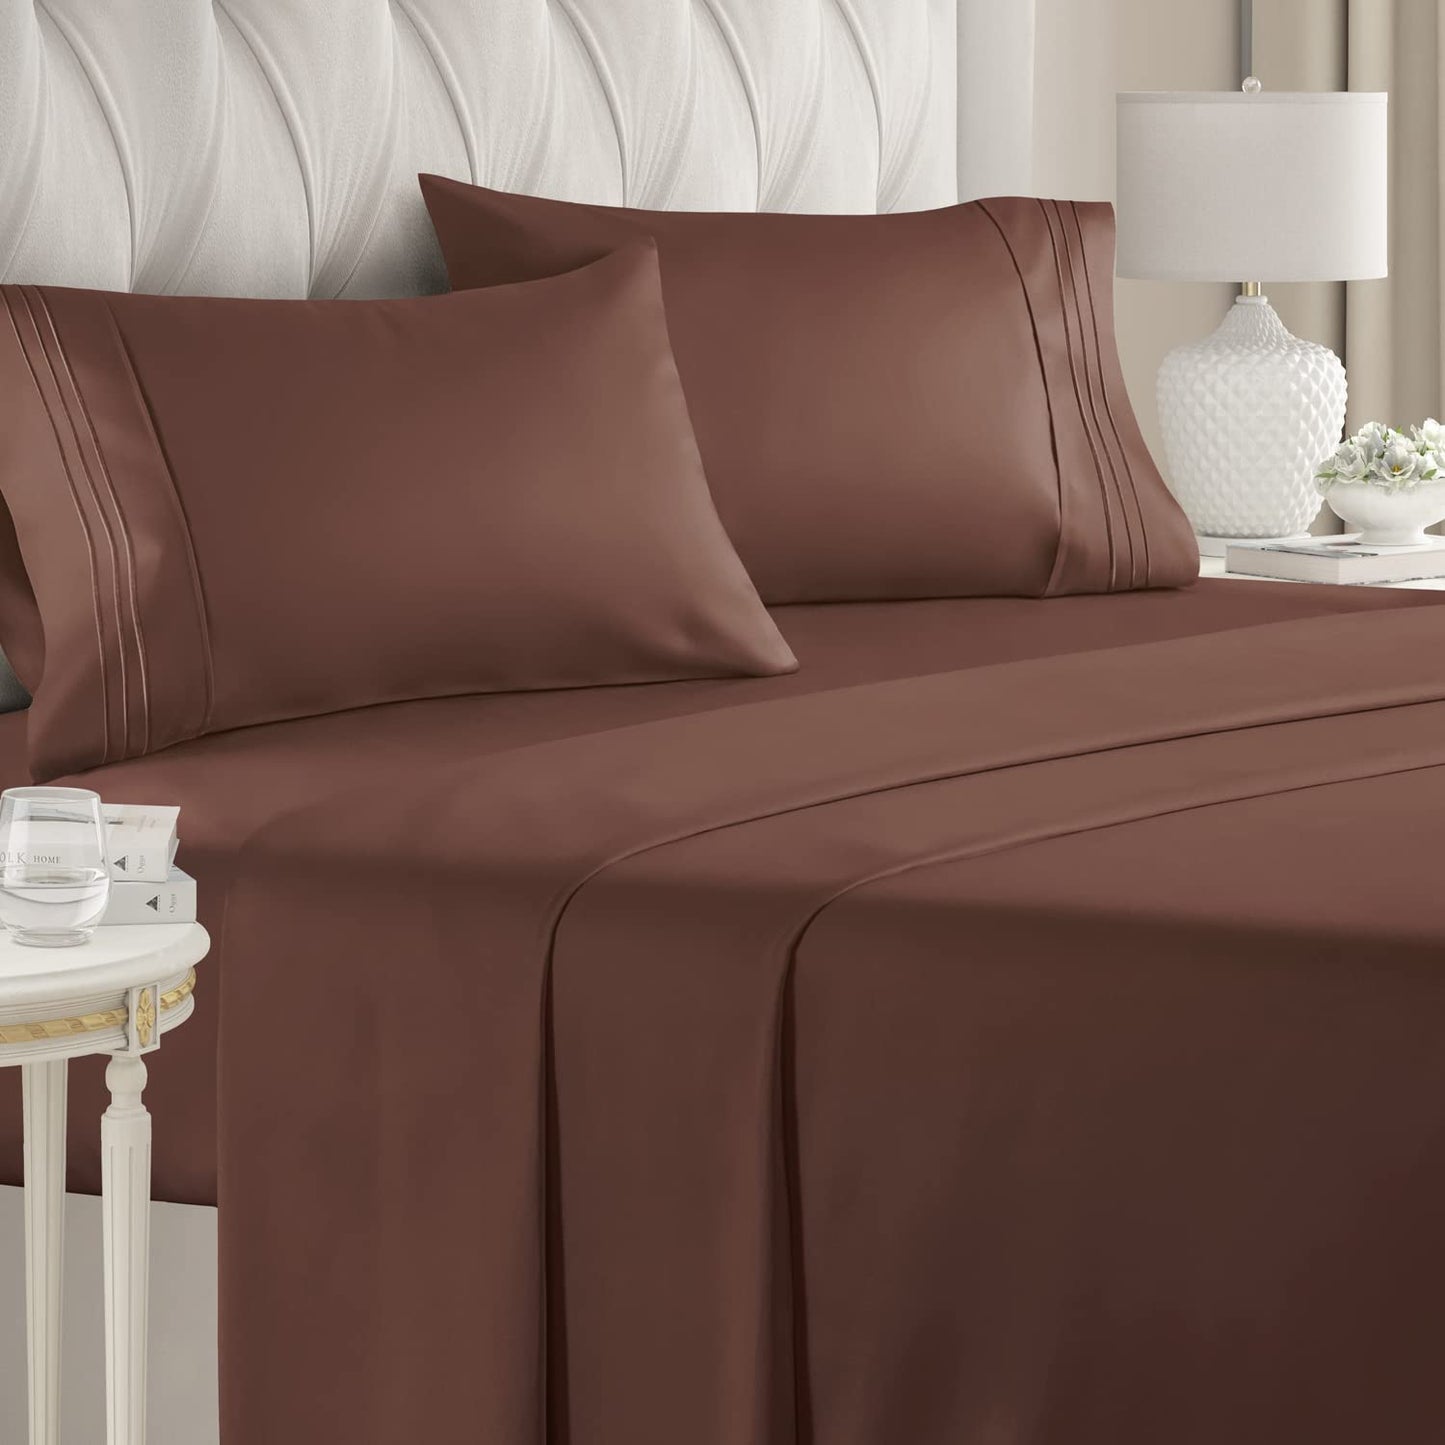 Buy 1000 Thread Count Sheet Set Queen Solid Chocolate Egyptian Cotton at- Egyptianhomelinens.com

